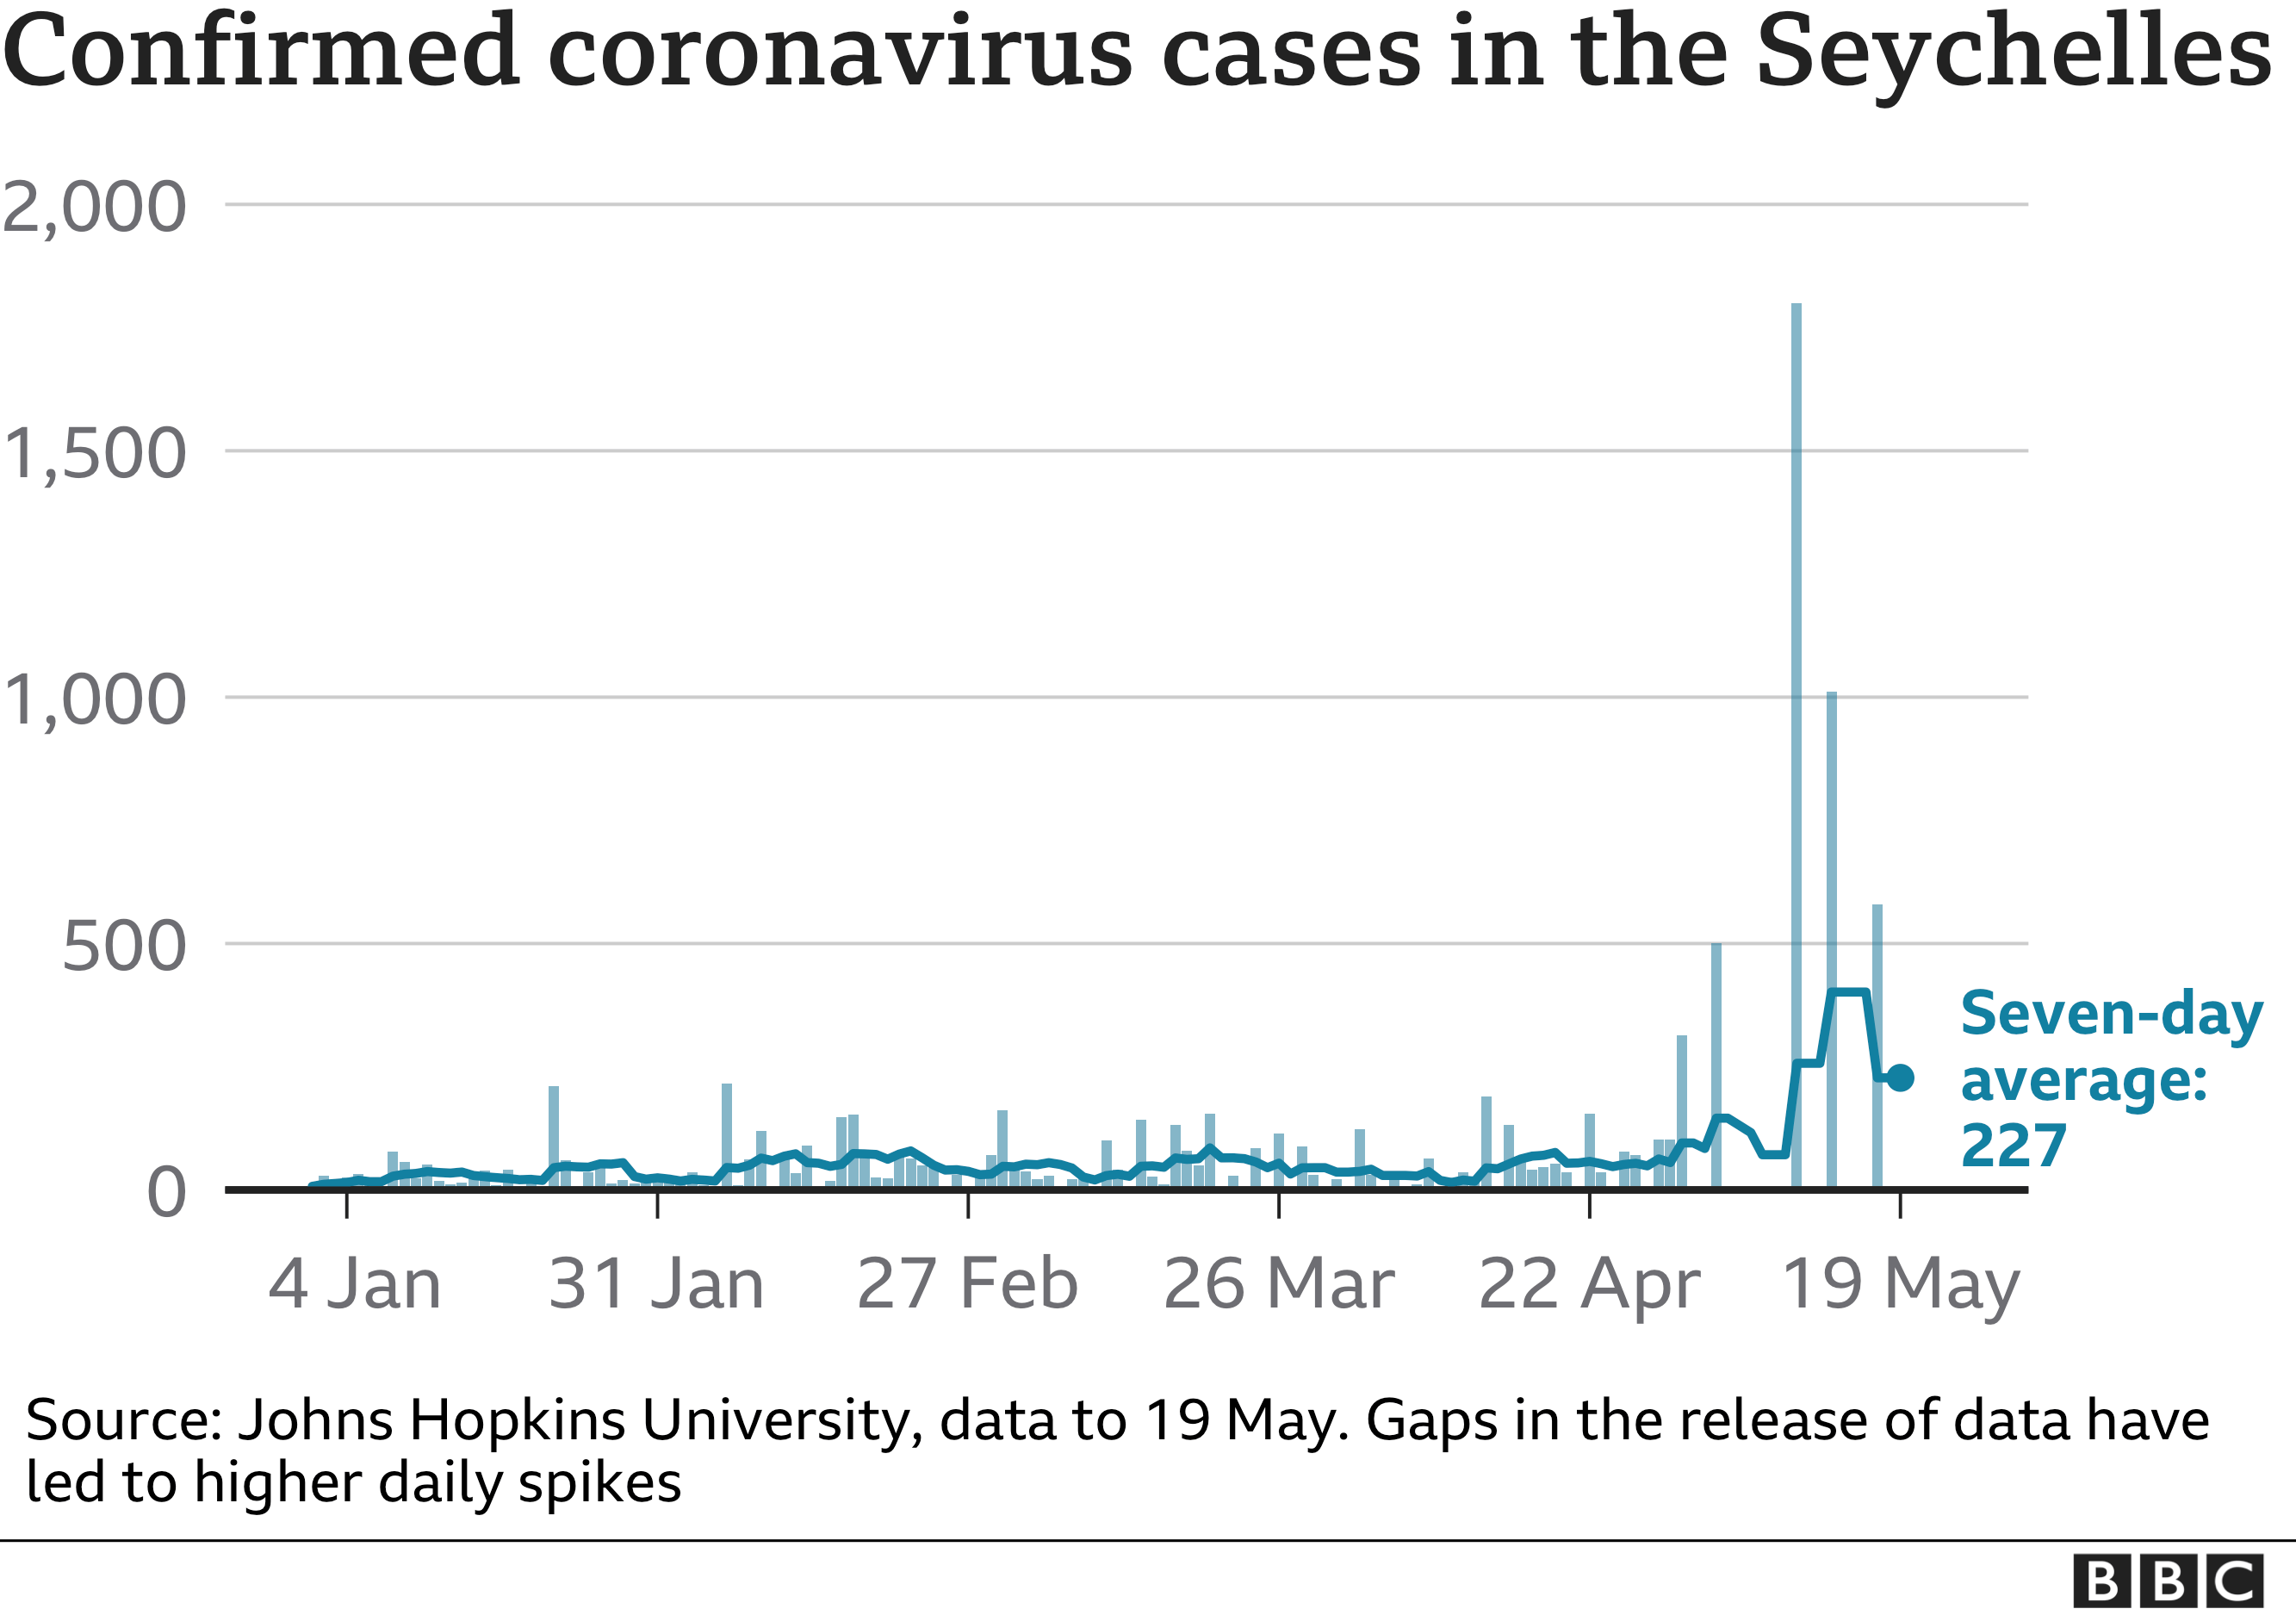 Chart showing 7 day rolling average for Covid-19 cases from 1 April to 19 May